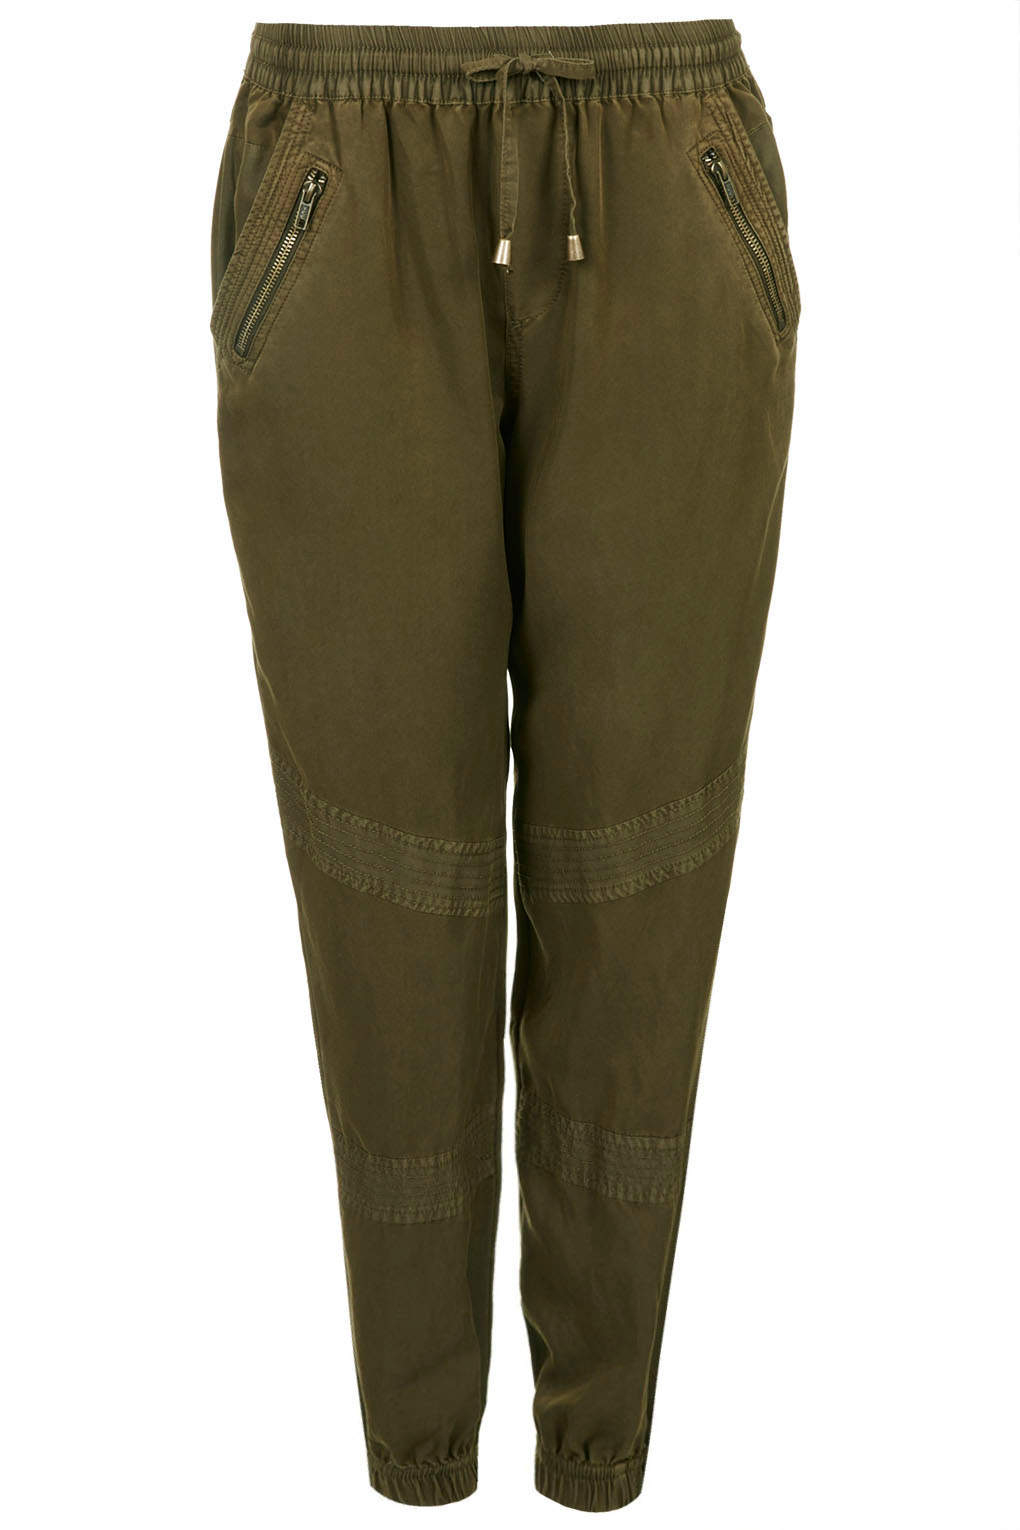 Lyst Topshop Womens  Casual Utility Joggers  Khaki  in Natural